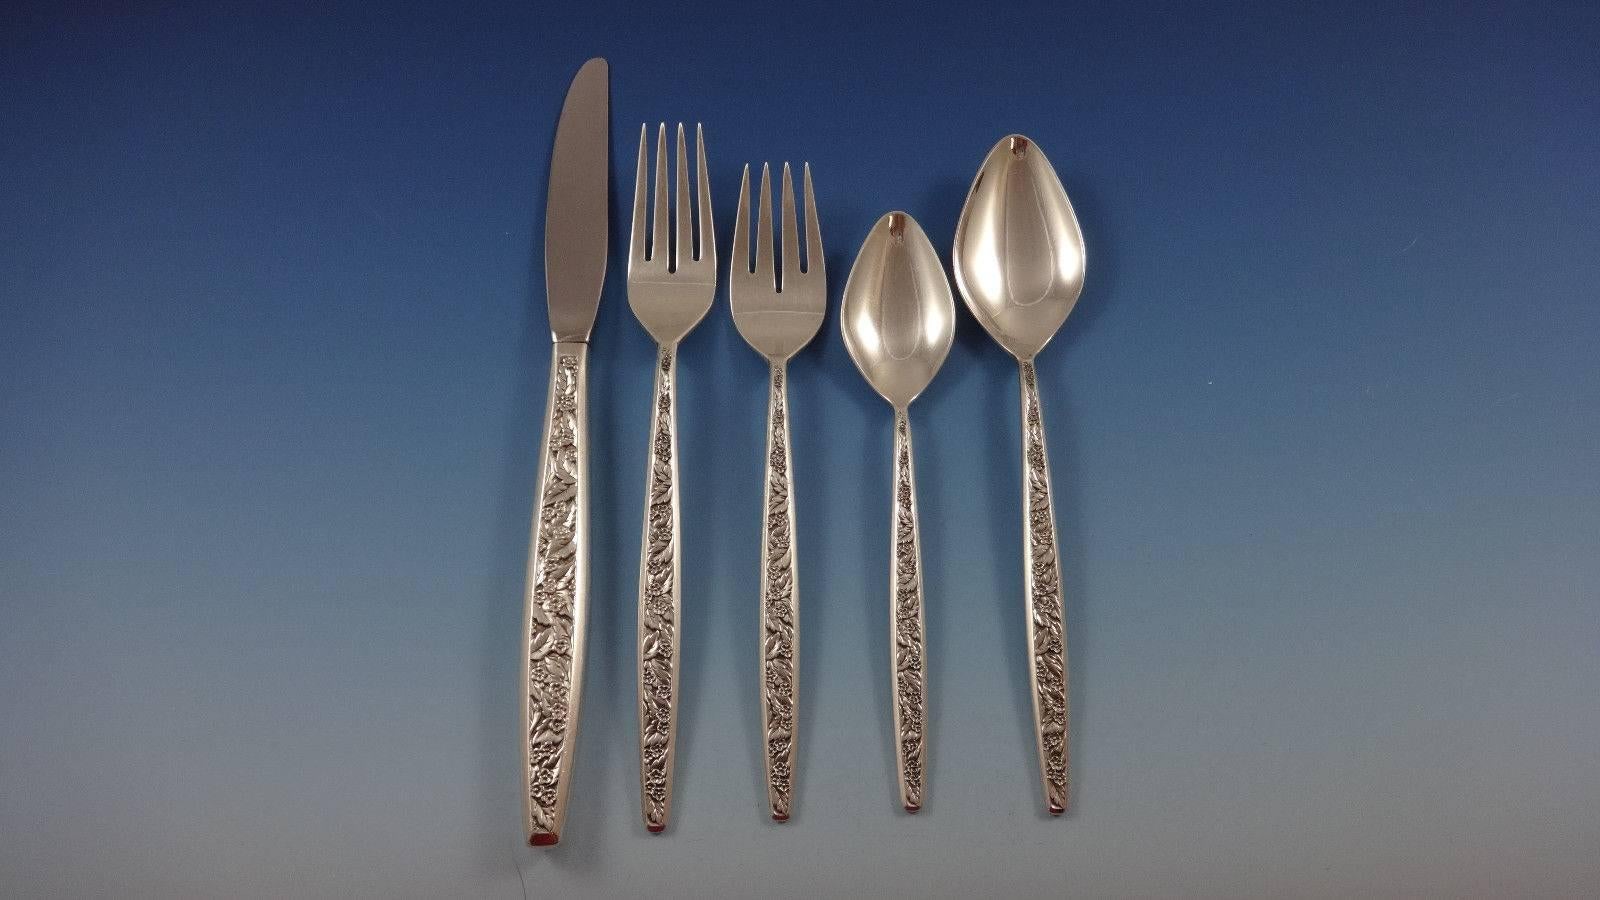 Valencia by International sterling silver flatware set of 71 pieces. This set includes:

12 knives, 9